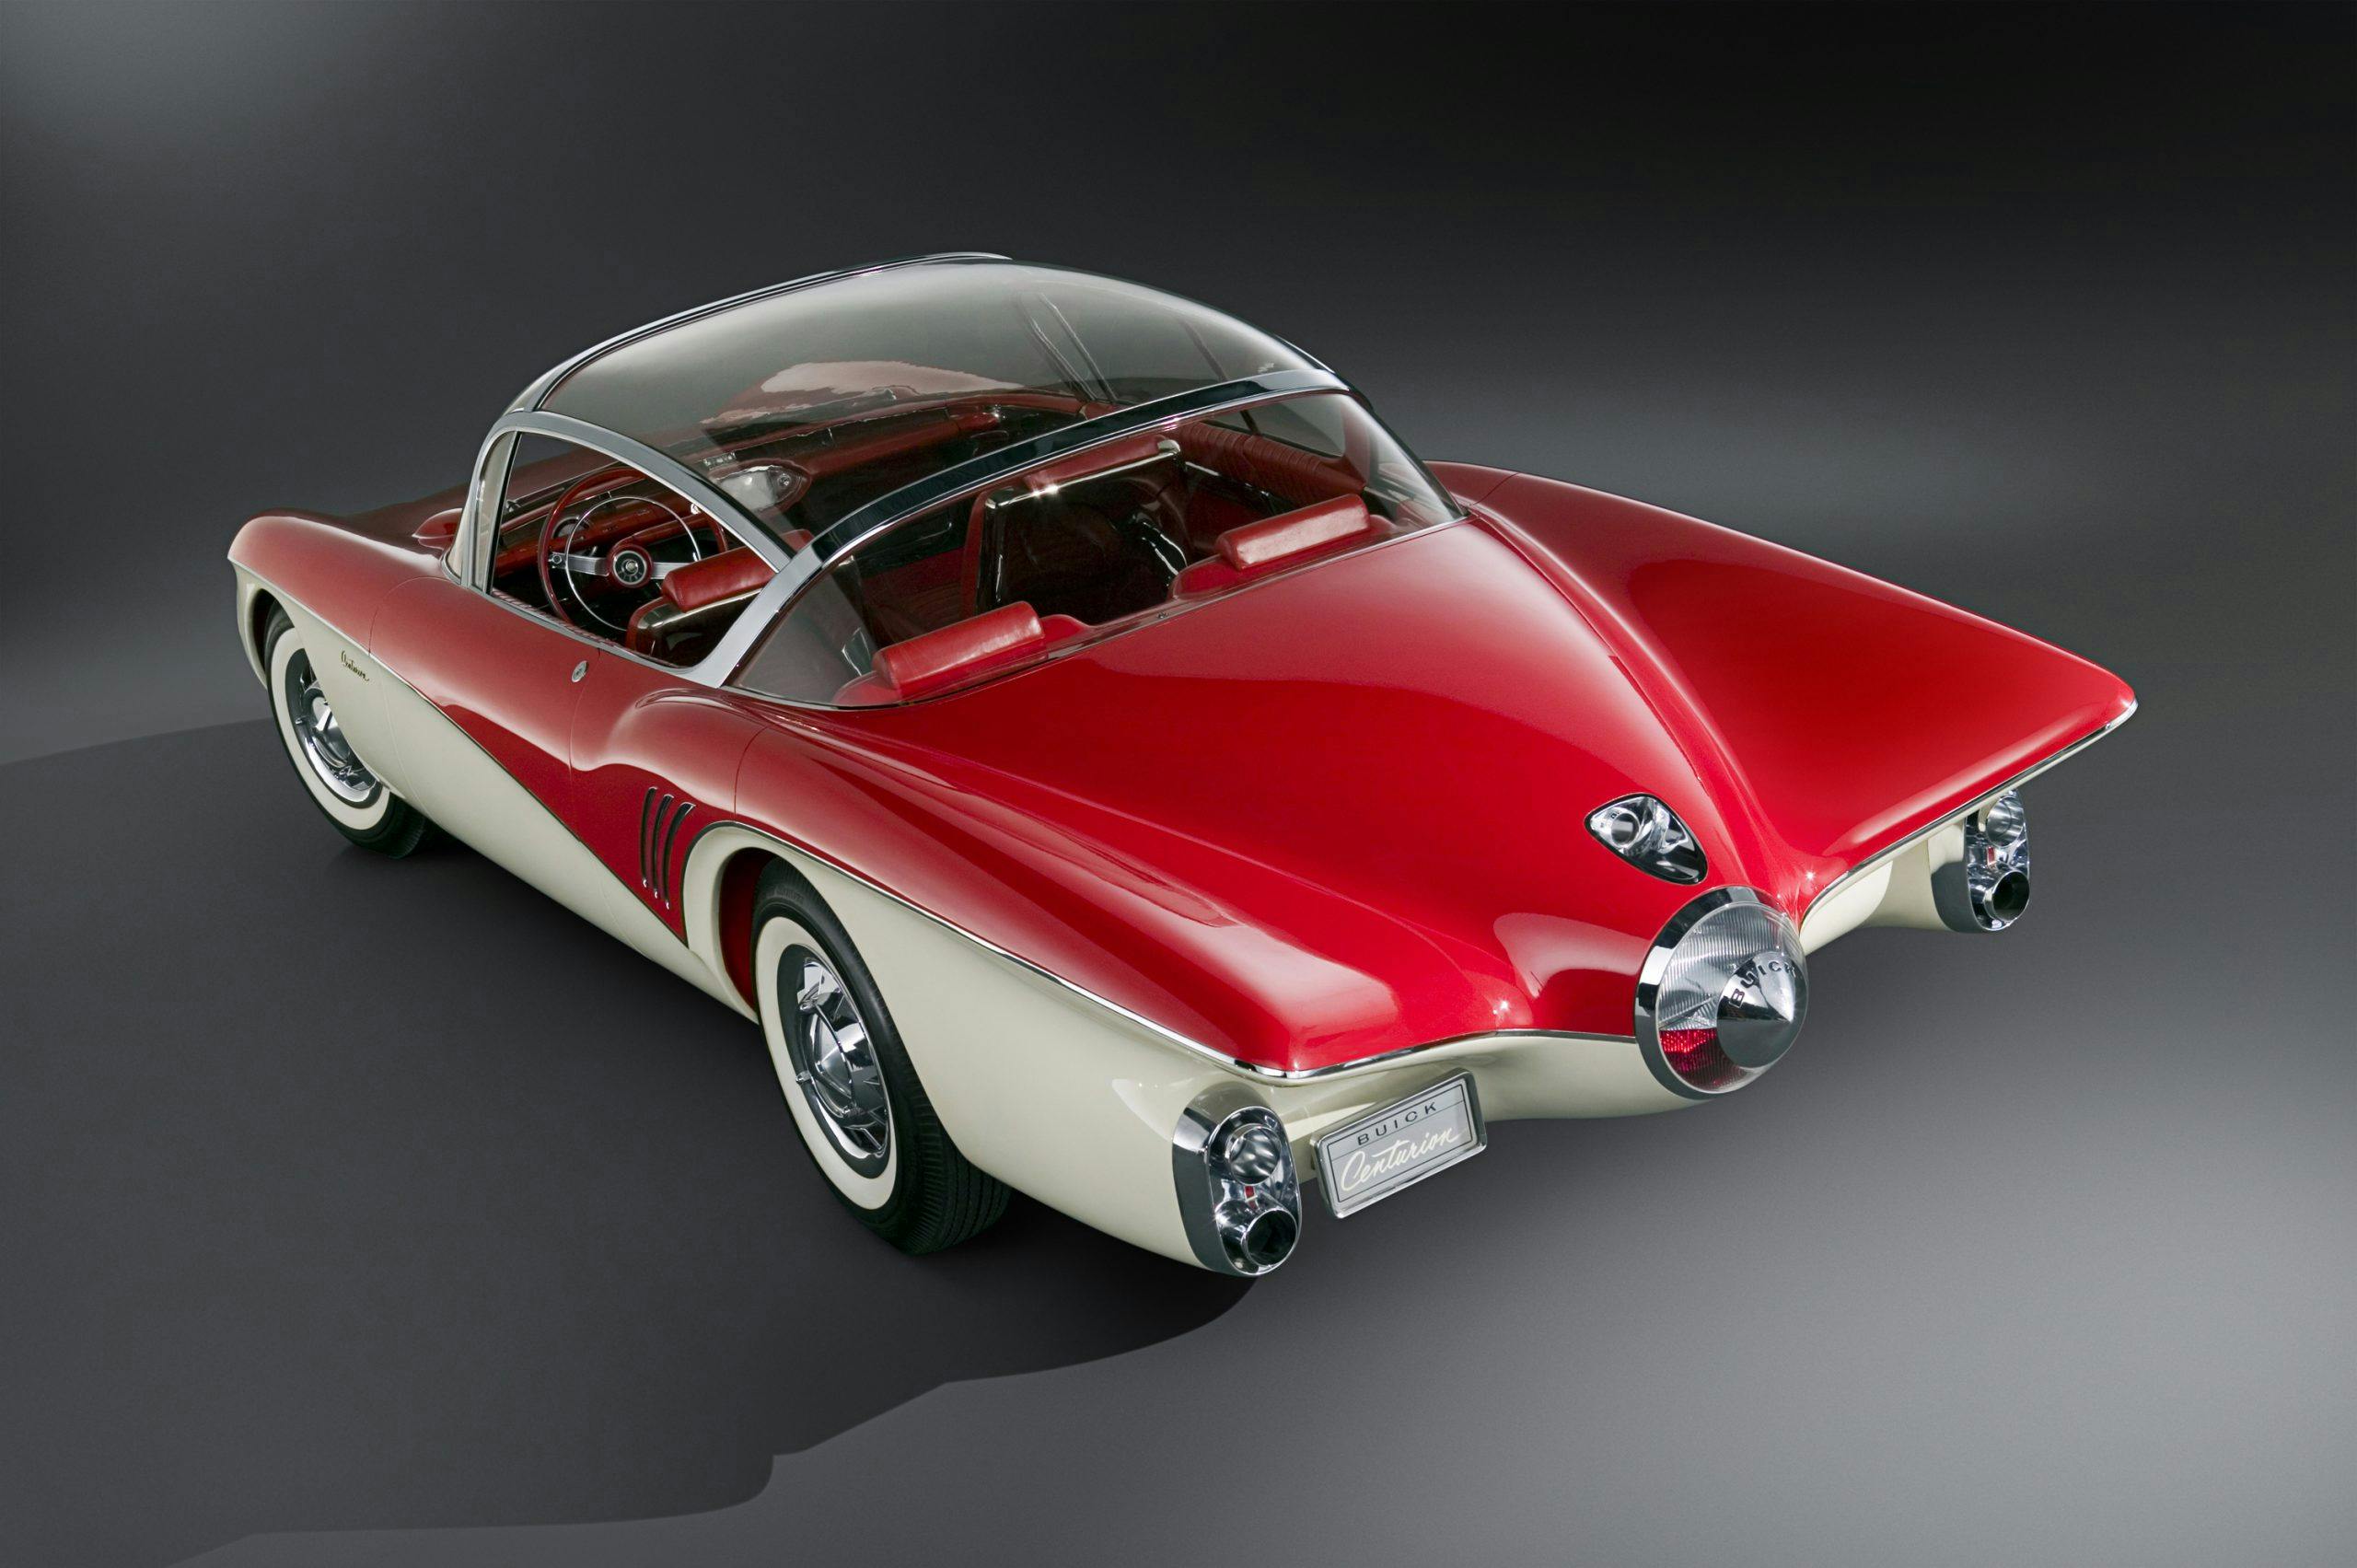 https://hagerty-media-prod.imgix.net/2021/10/Backup_Cam_Buick_Centurion_Concept_rear-three-quarter-scaled.jpg?auto=format%2Ccompress&fit=crop&ixlib=php-3.3.0&max-h=426&max-w=640